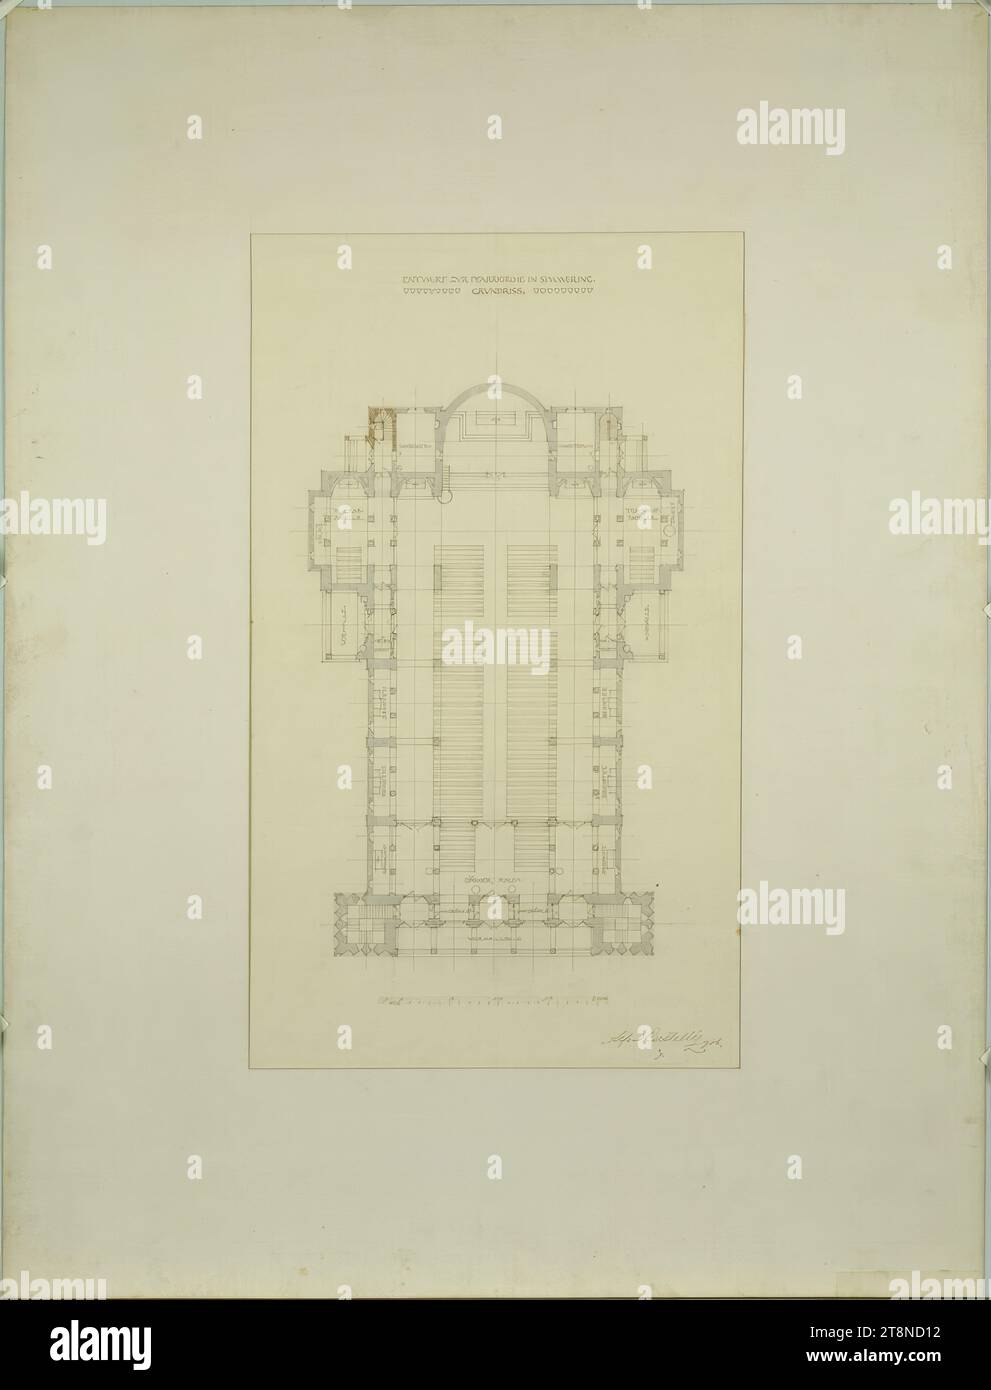 Vienna-Simmering, parish church design, ground plan, Alfred Castelliz (artist, Celje 1870 - 1940 Vienna), 1906, architectural drawing, Aquafix; Pencil (before) and pen drawing (brown), 65.8 x 49.8 cm, 'DRAFT ZVR PARISH CHURCH IN SIMMERING./ GRUNDRISS.'; Specification of the room functions, scale, signature and date Stock Photo